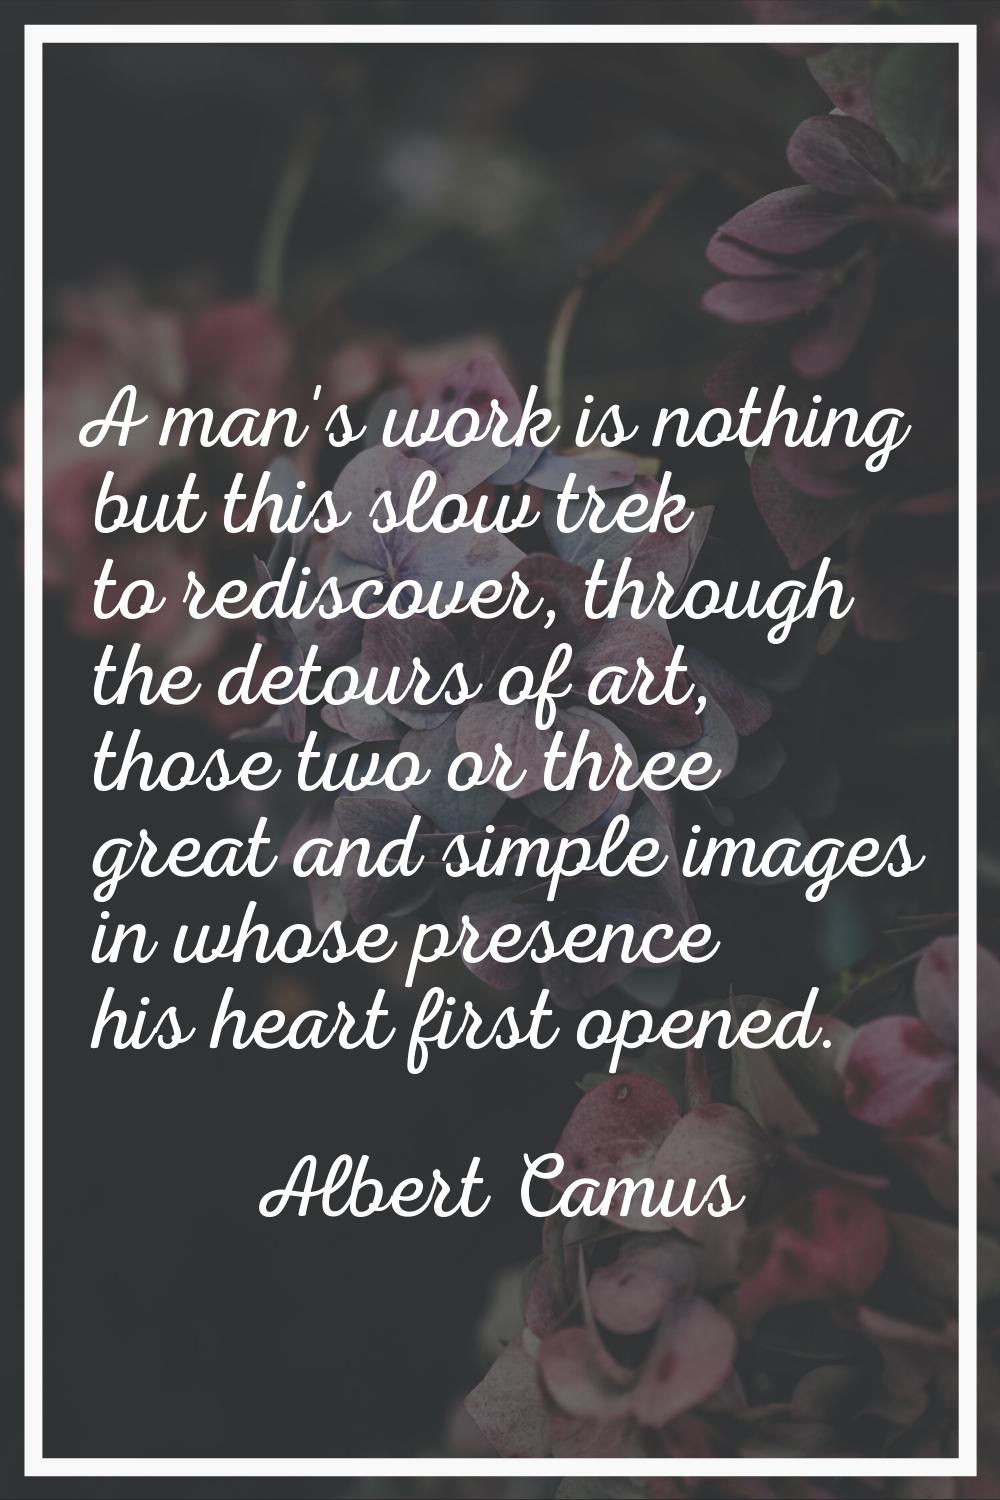 A man's work is nothing but this slow trek to rediscover, through the detours of art, those two or 